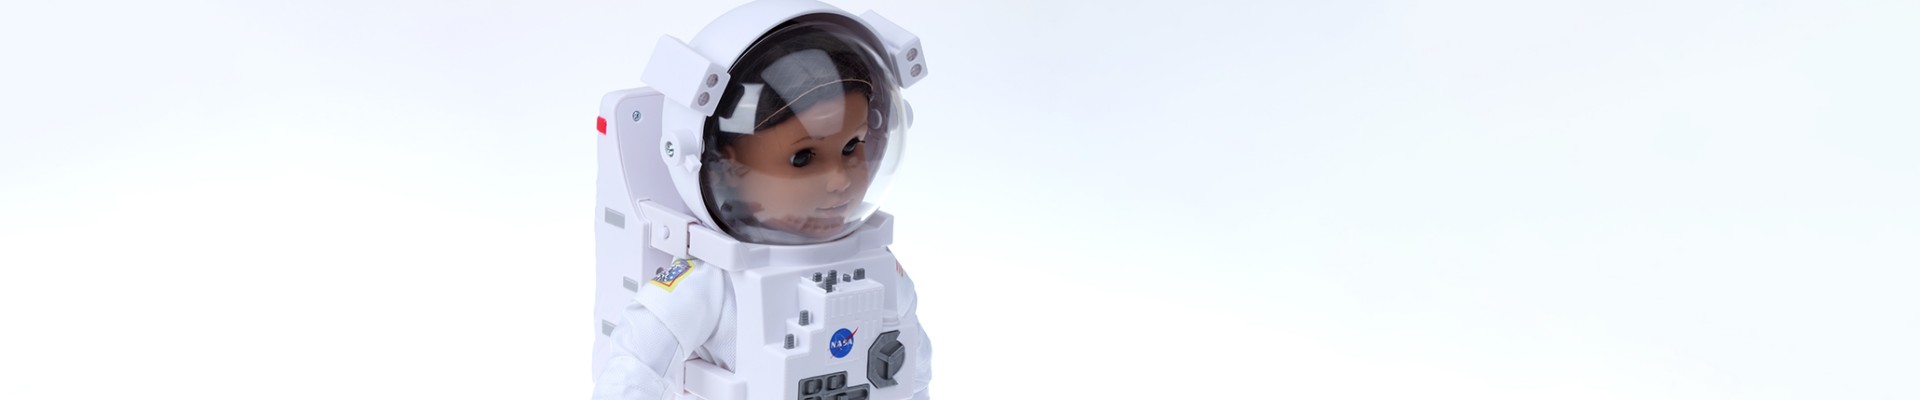 Doll „Luciana Vega“ in a space suit: 